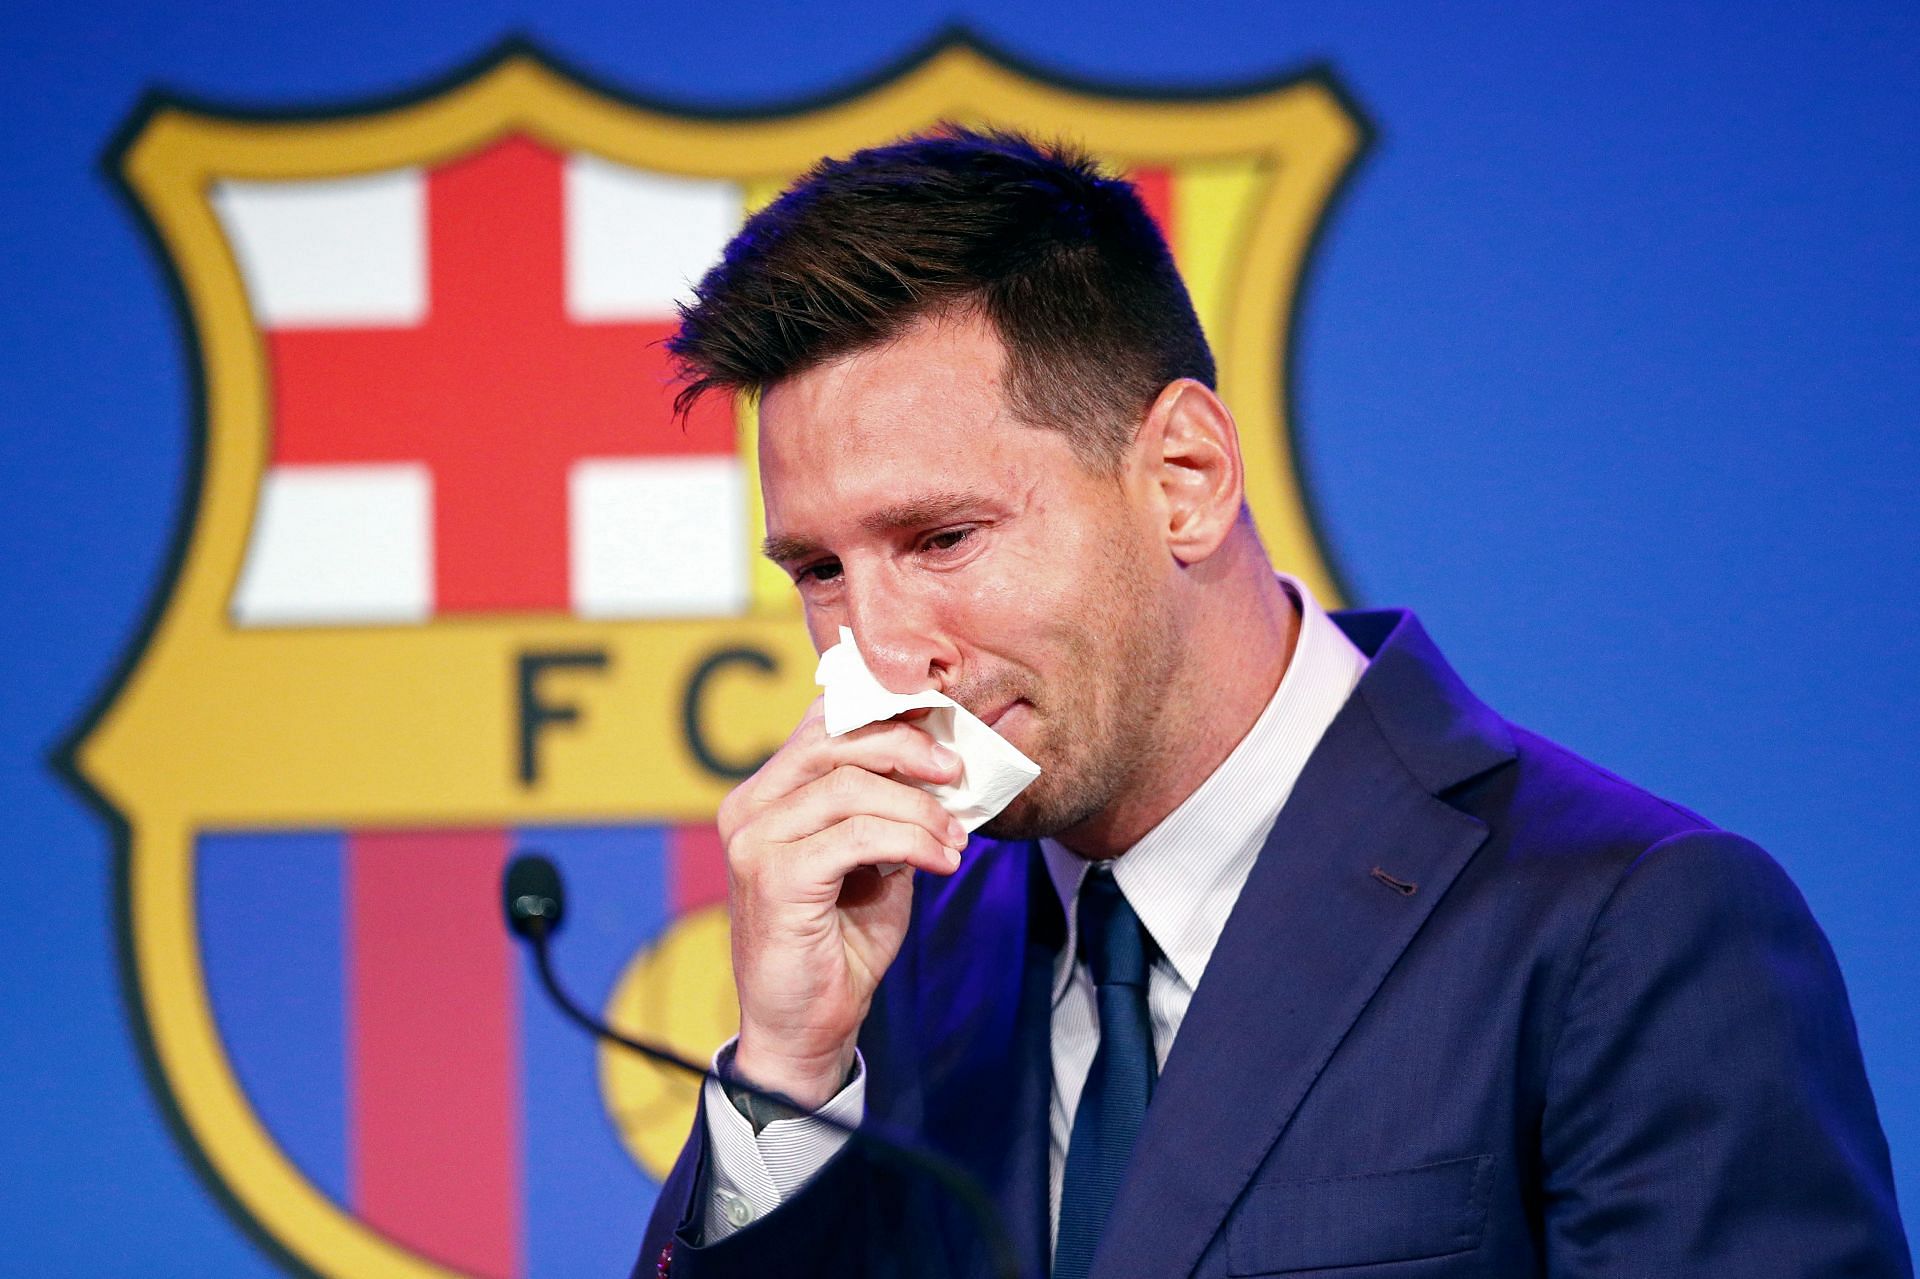 Lionel Messi has been linked with a return to Barcelona.